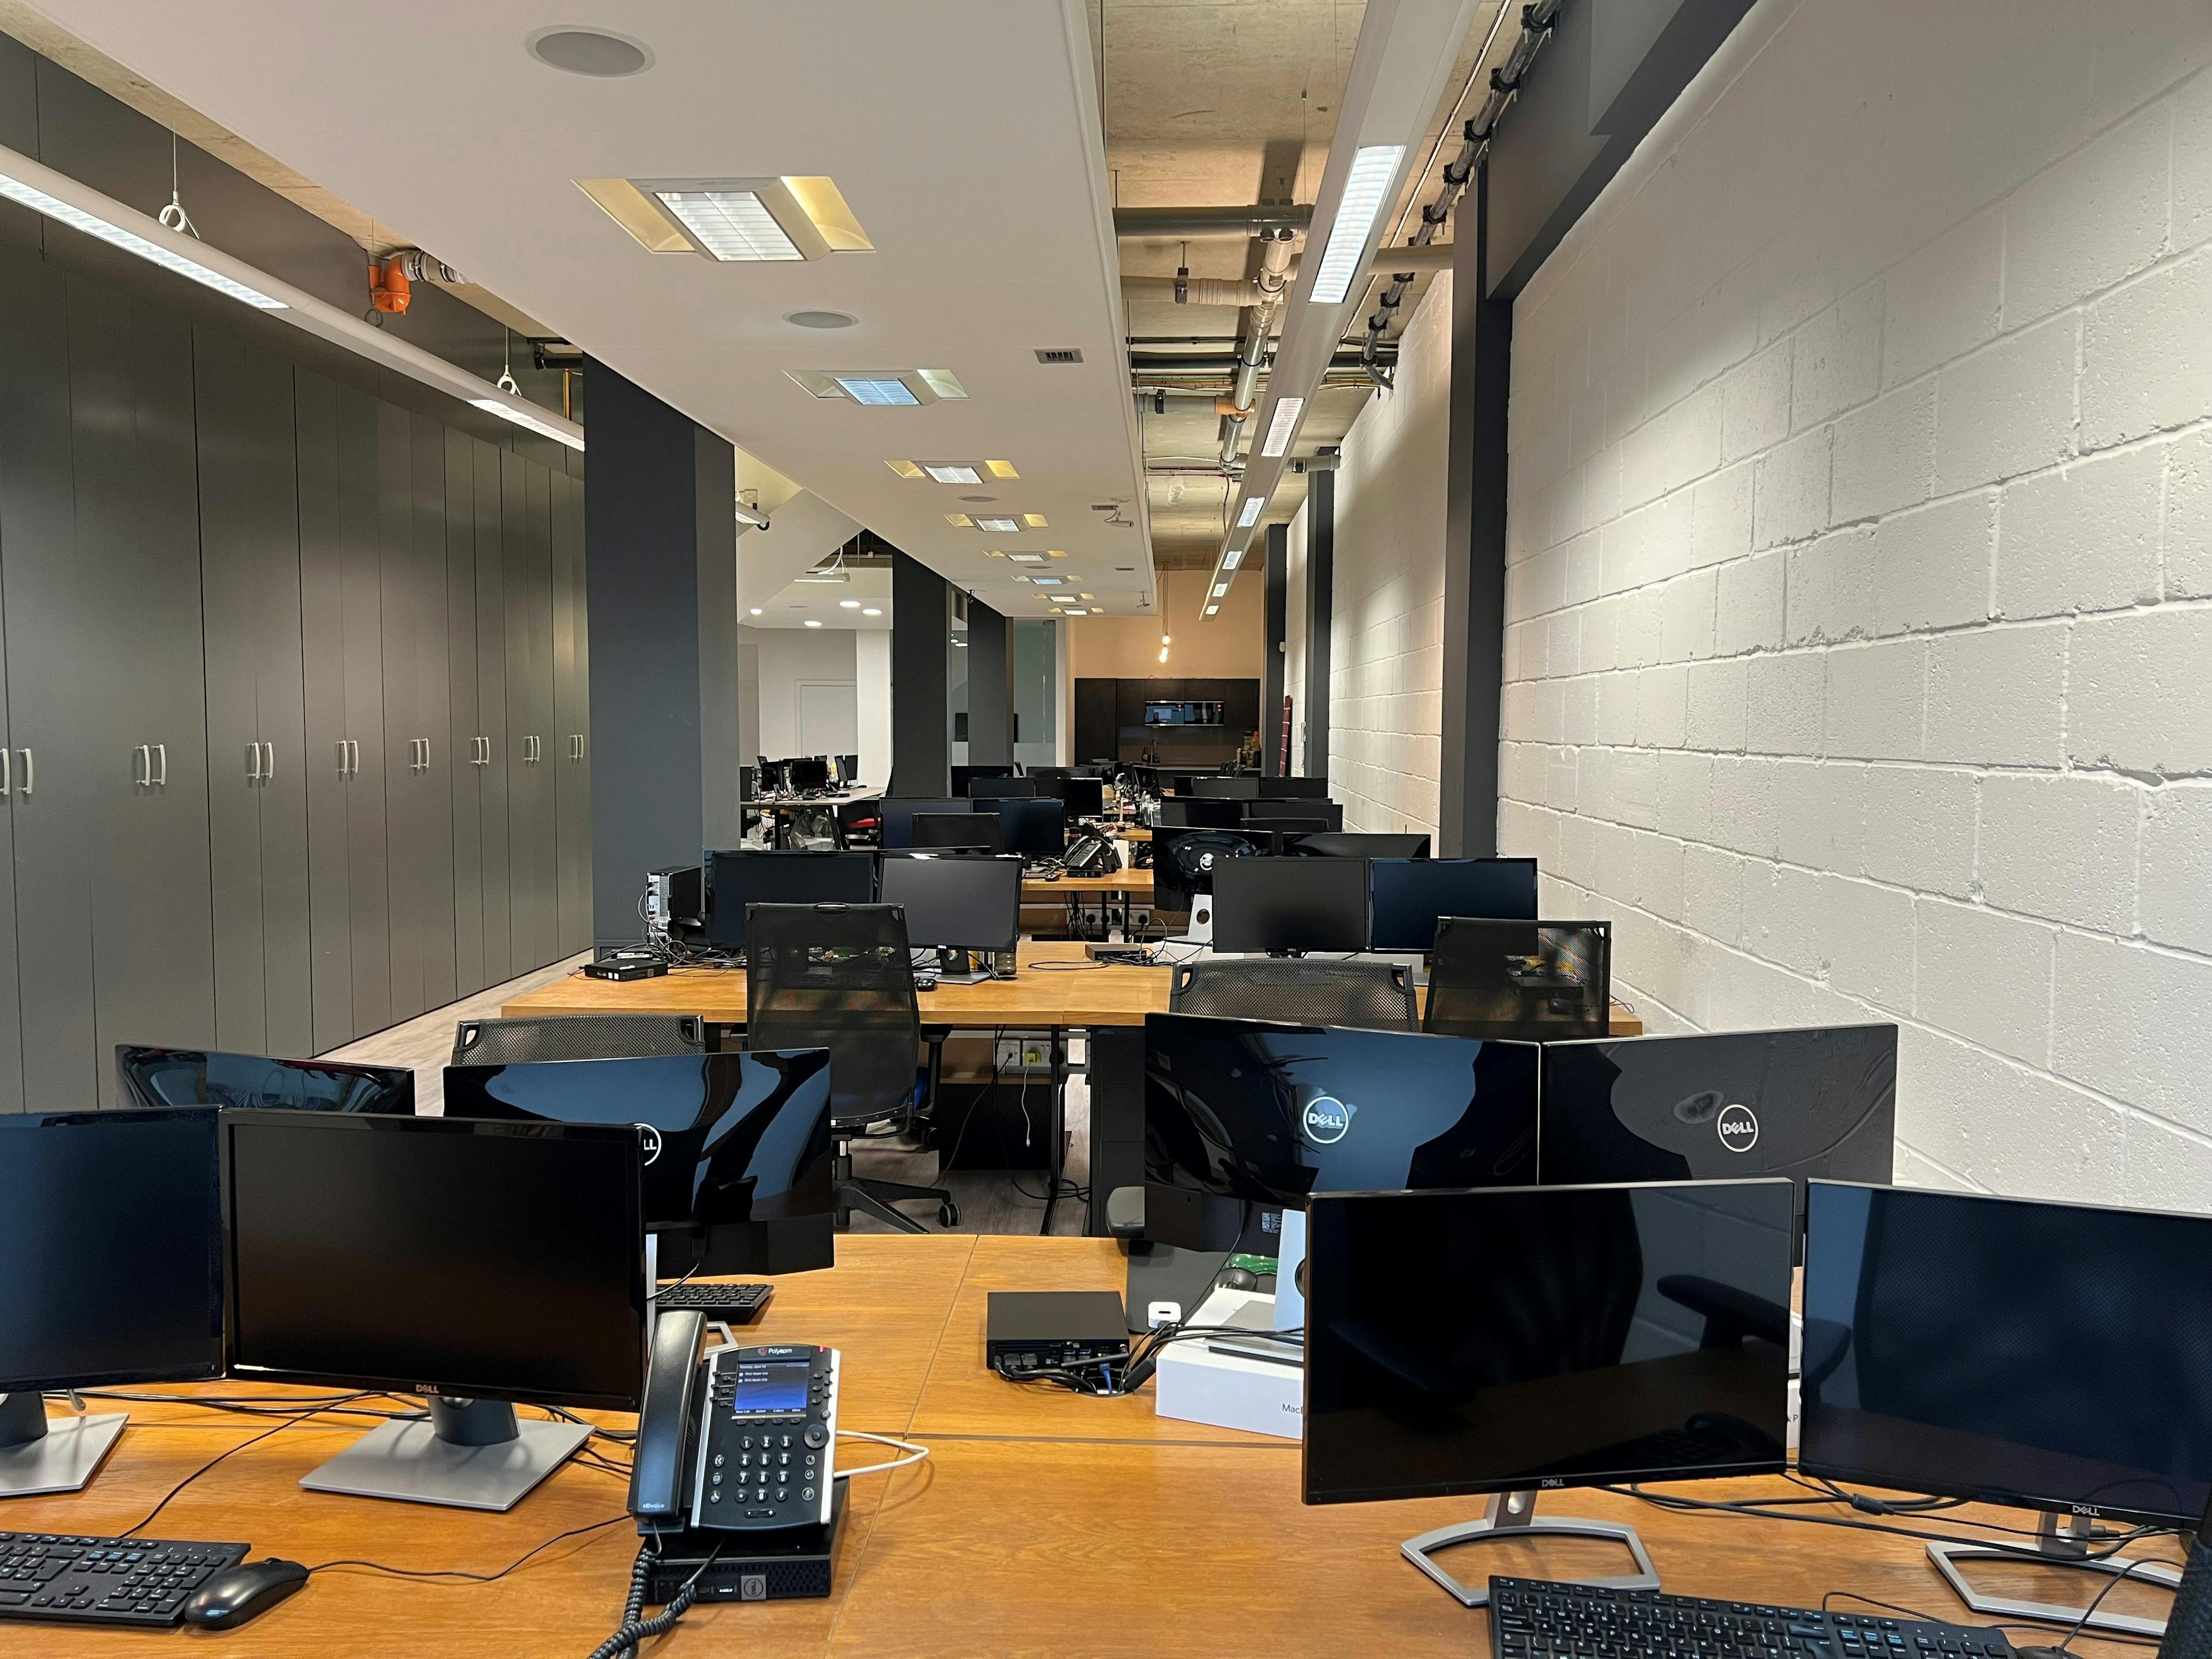 Shoreditch - 28 Person Office - Drysdale Street 